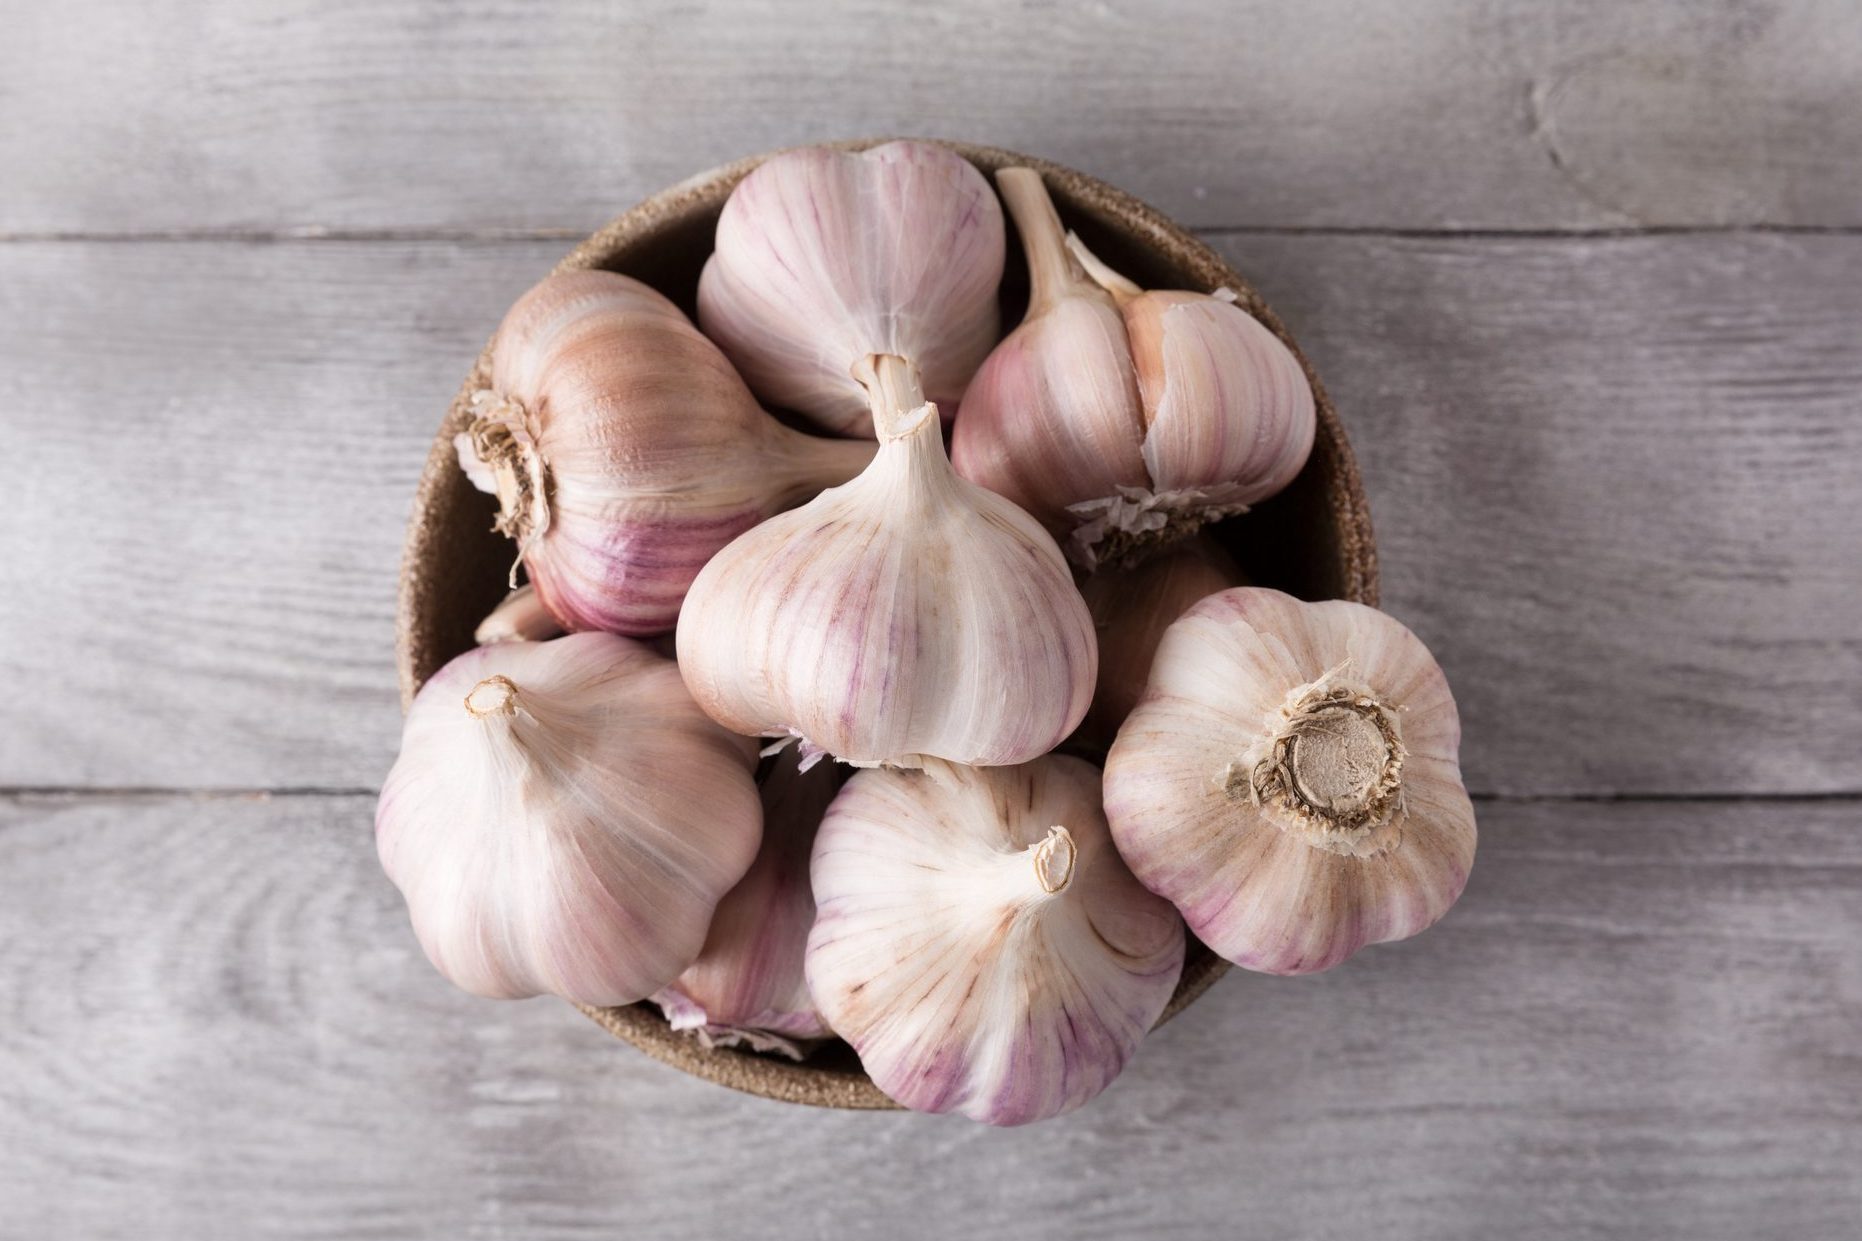 Men's Wellbeing Can Be Improved With Garlic